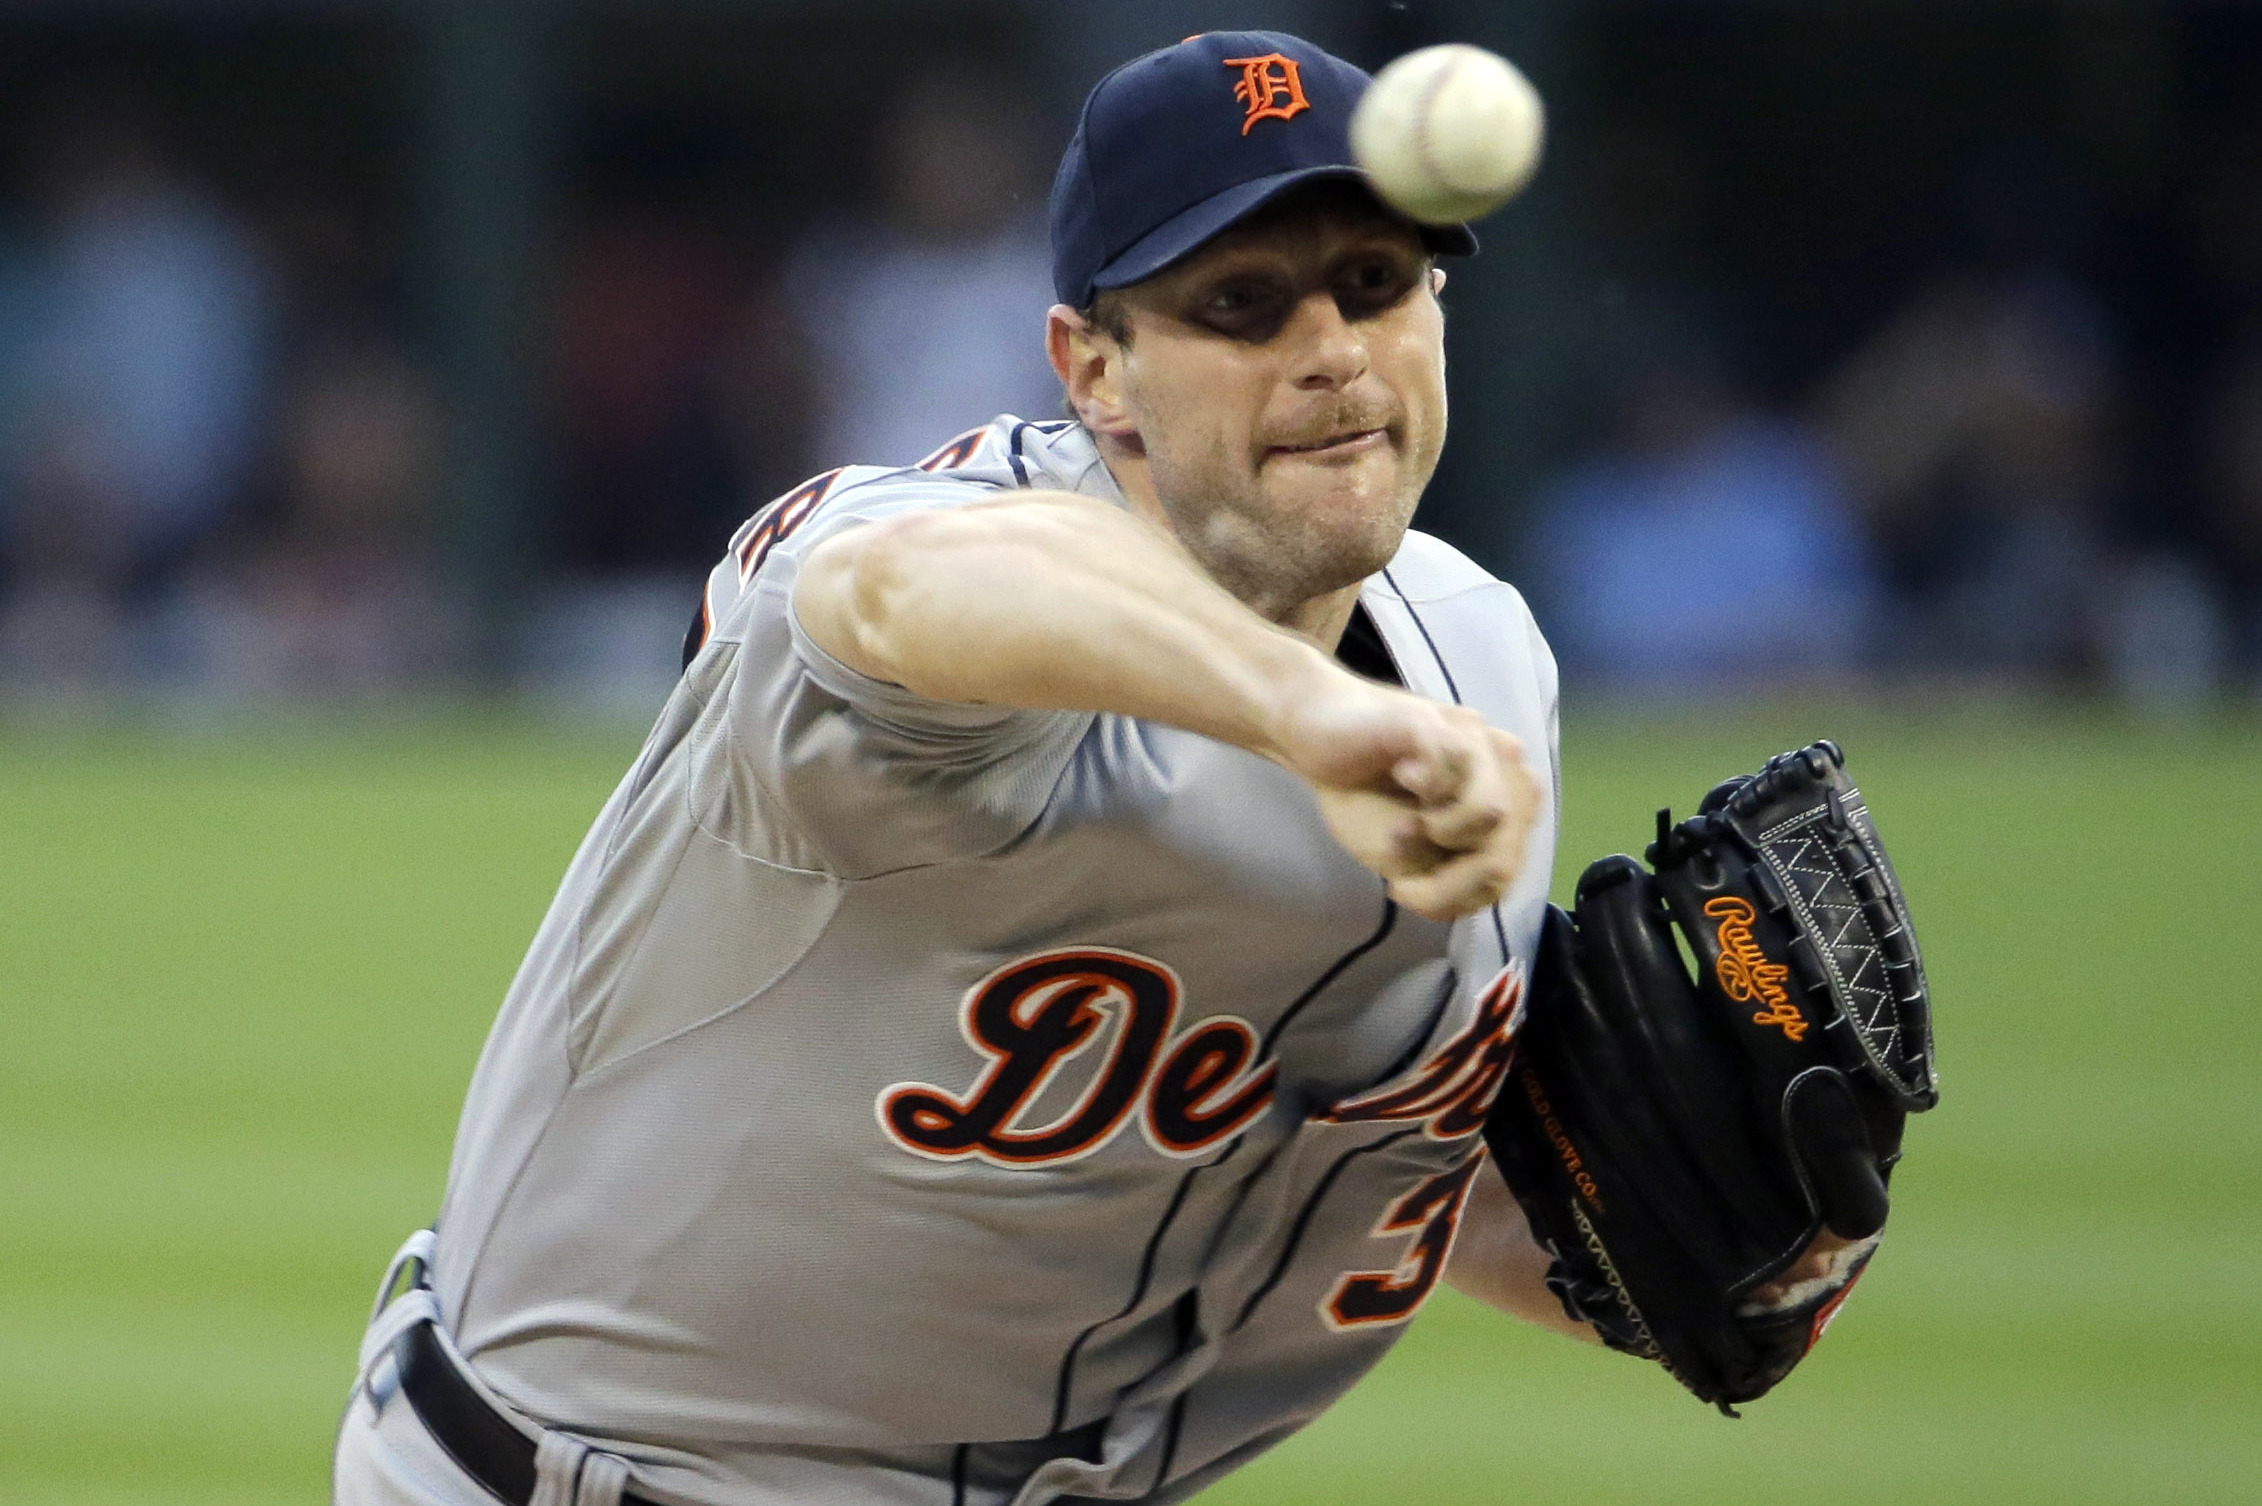 Tigers pitcher Max Scherzer uses math background as formula for success 